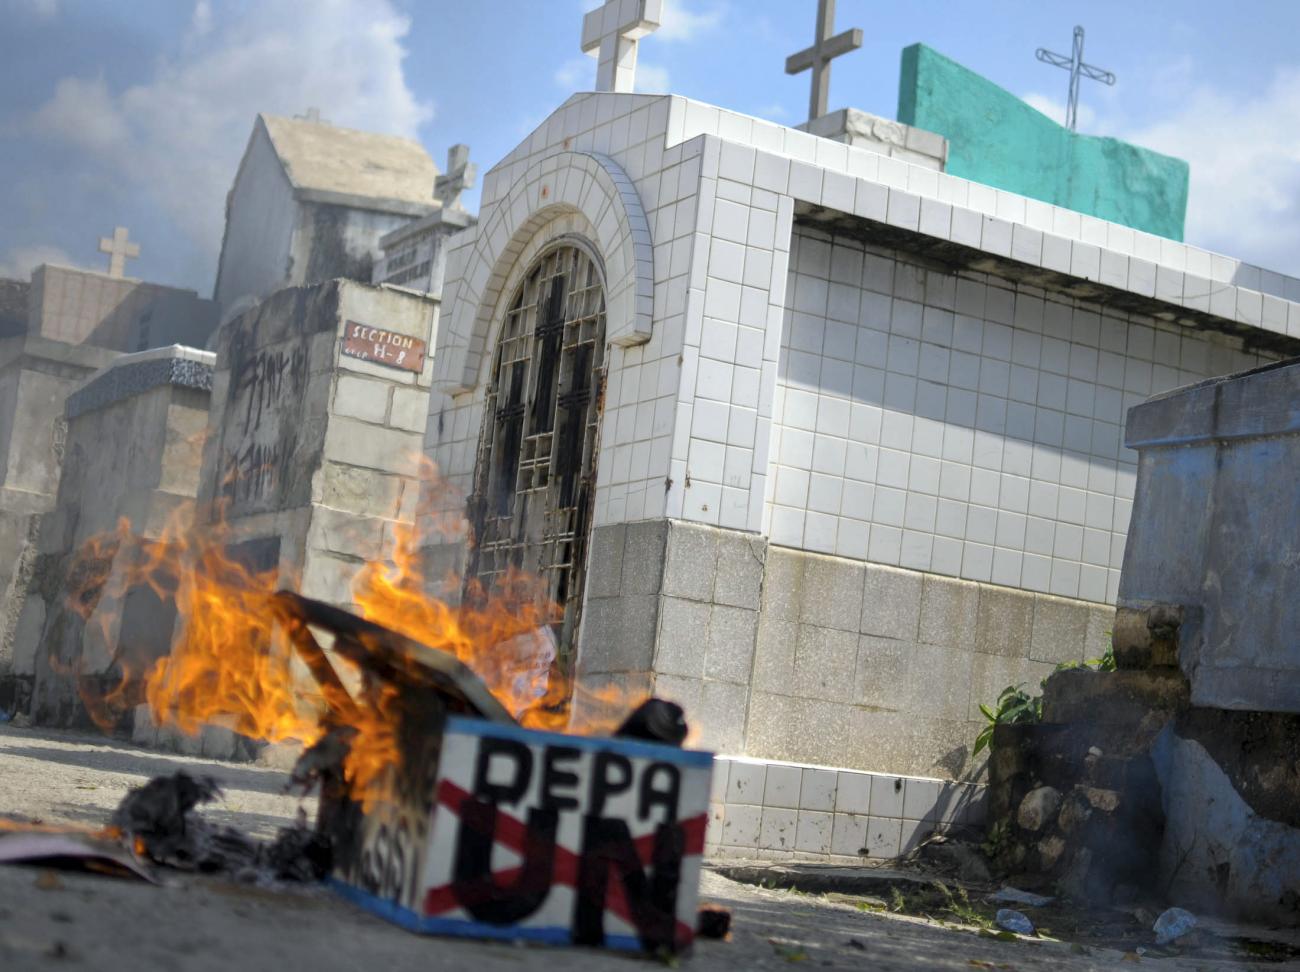 A mock coffin set on fire by demonstrators burns in a cemetery during a protest against the United Nations (UN) in Port-au-Prince October 19, 2011. The demonstrators are blaming the UN for the deaths associated with cholera in the country. 